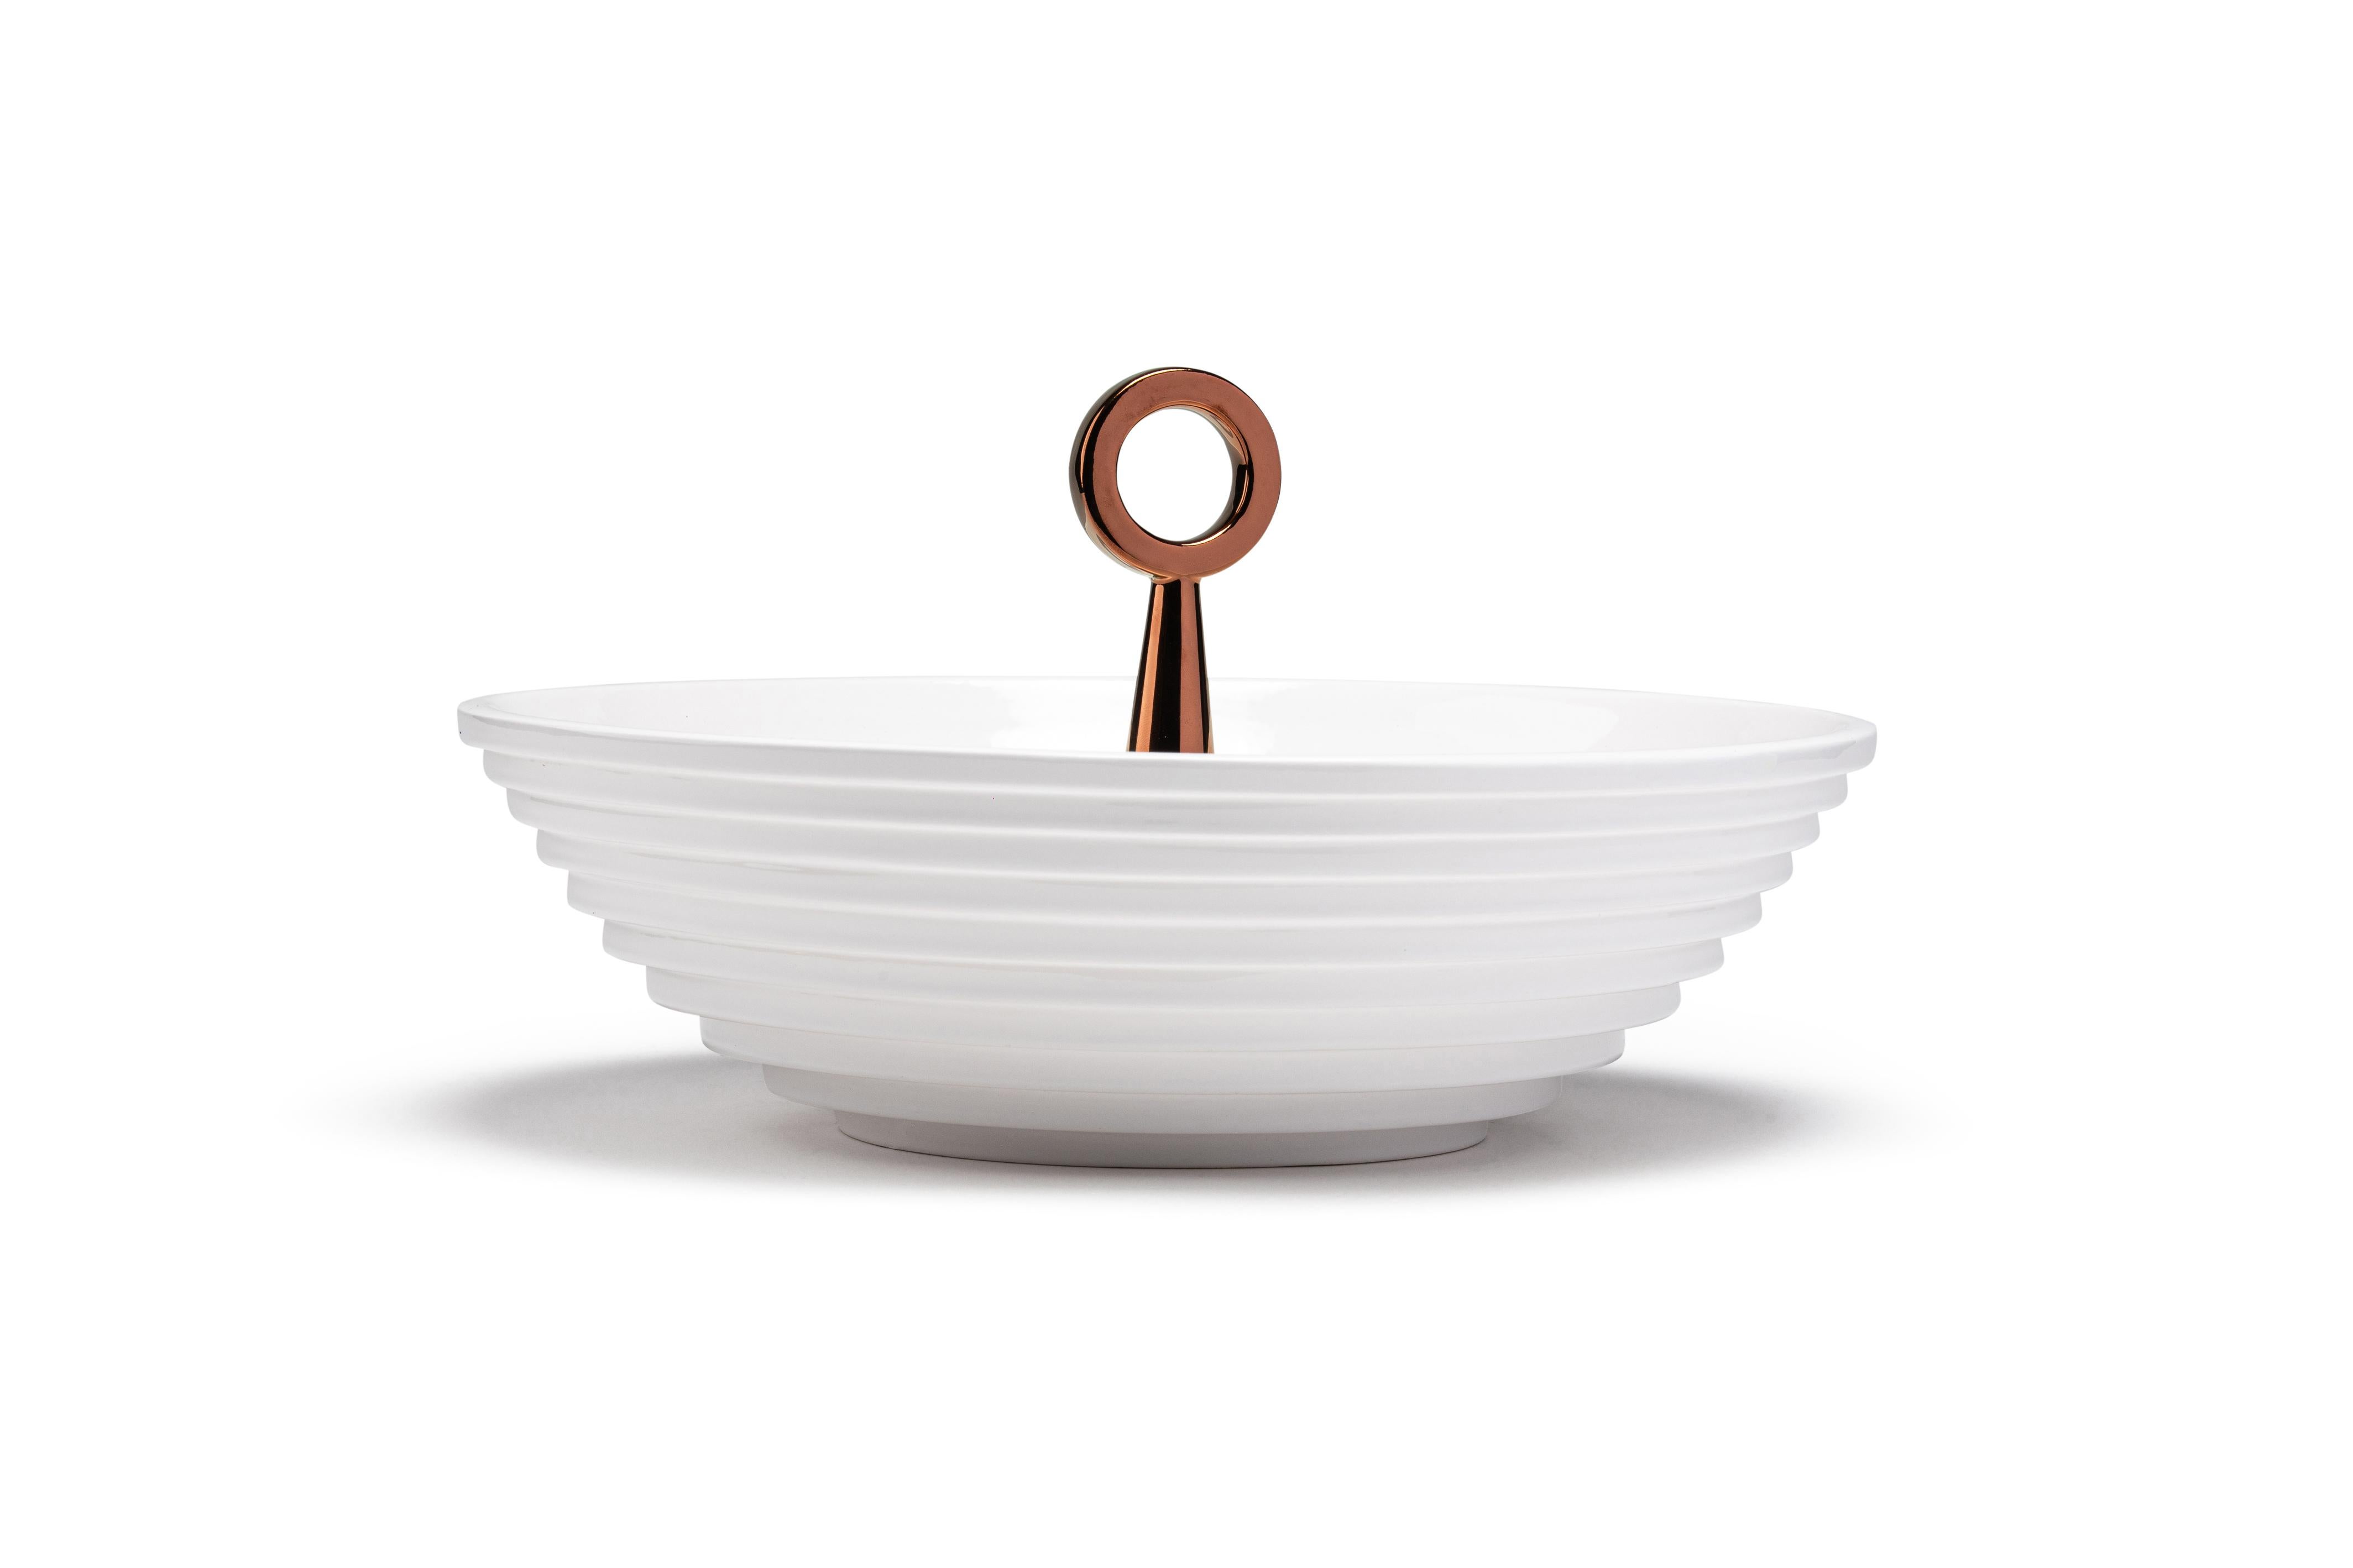 The 12:30 from the 'Meridiane' collection is a white painted ceramic bowl with copper painted details. It is an accessory that can give personality to a minimalist environment and at the same time it can find its perfect location in a more classic